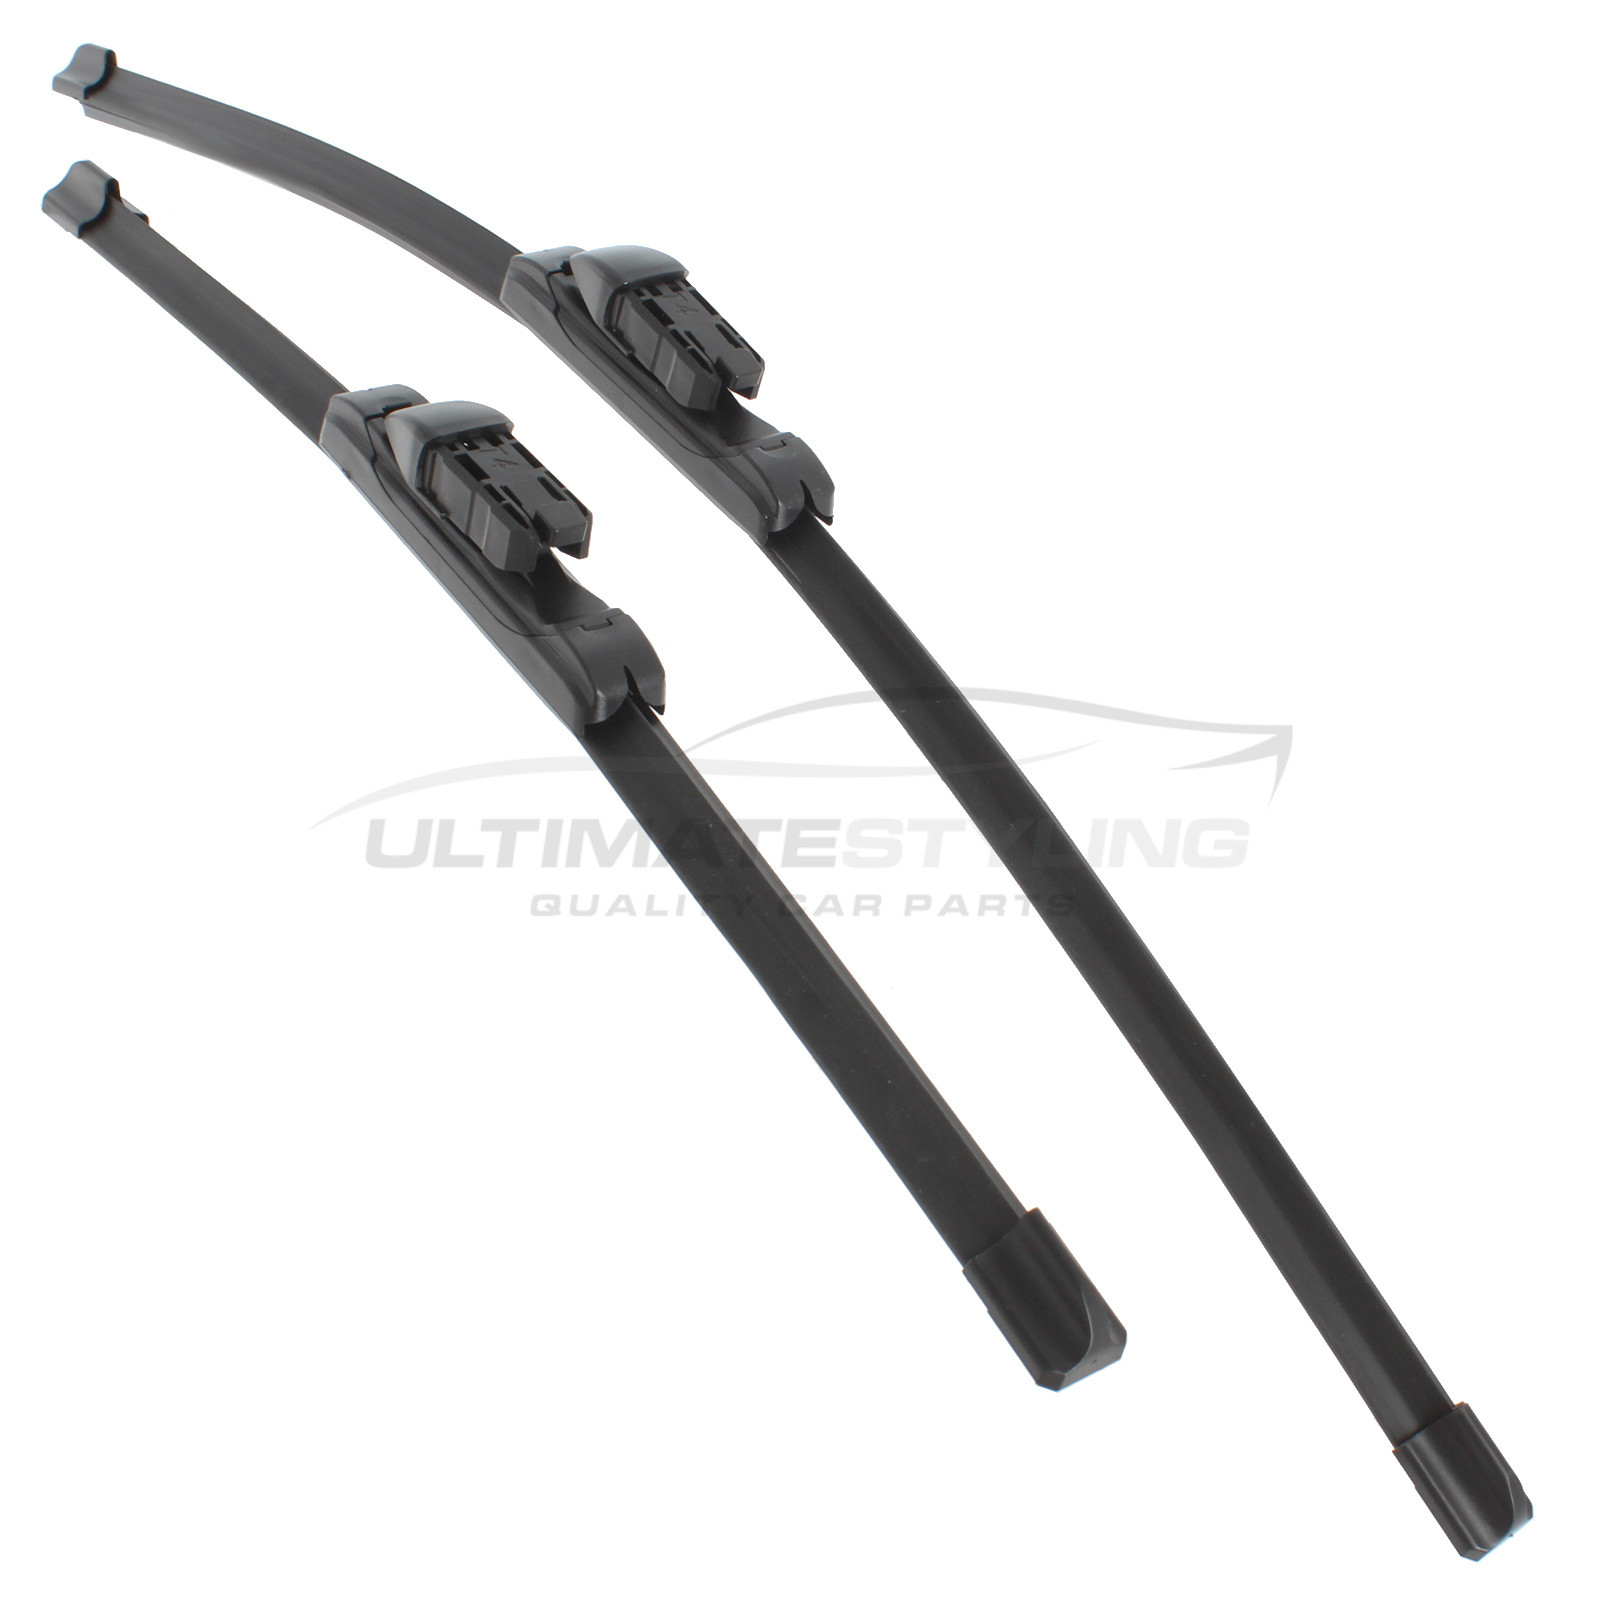 Drivers Side & Passenger Side (Front) Wiper Blades for Vauxhall Corsa